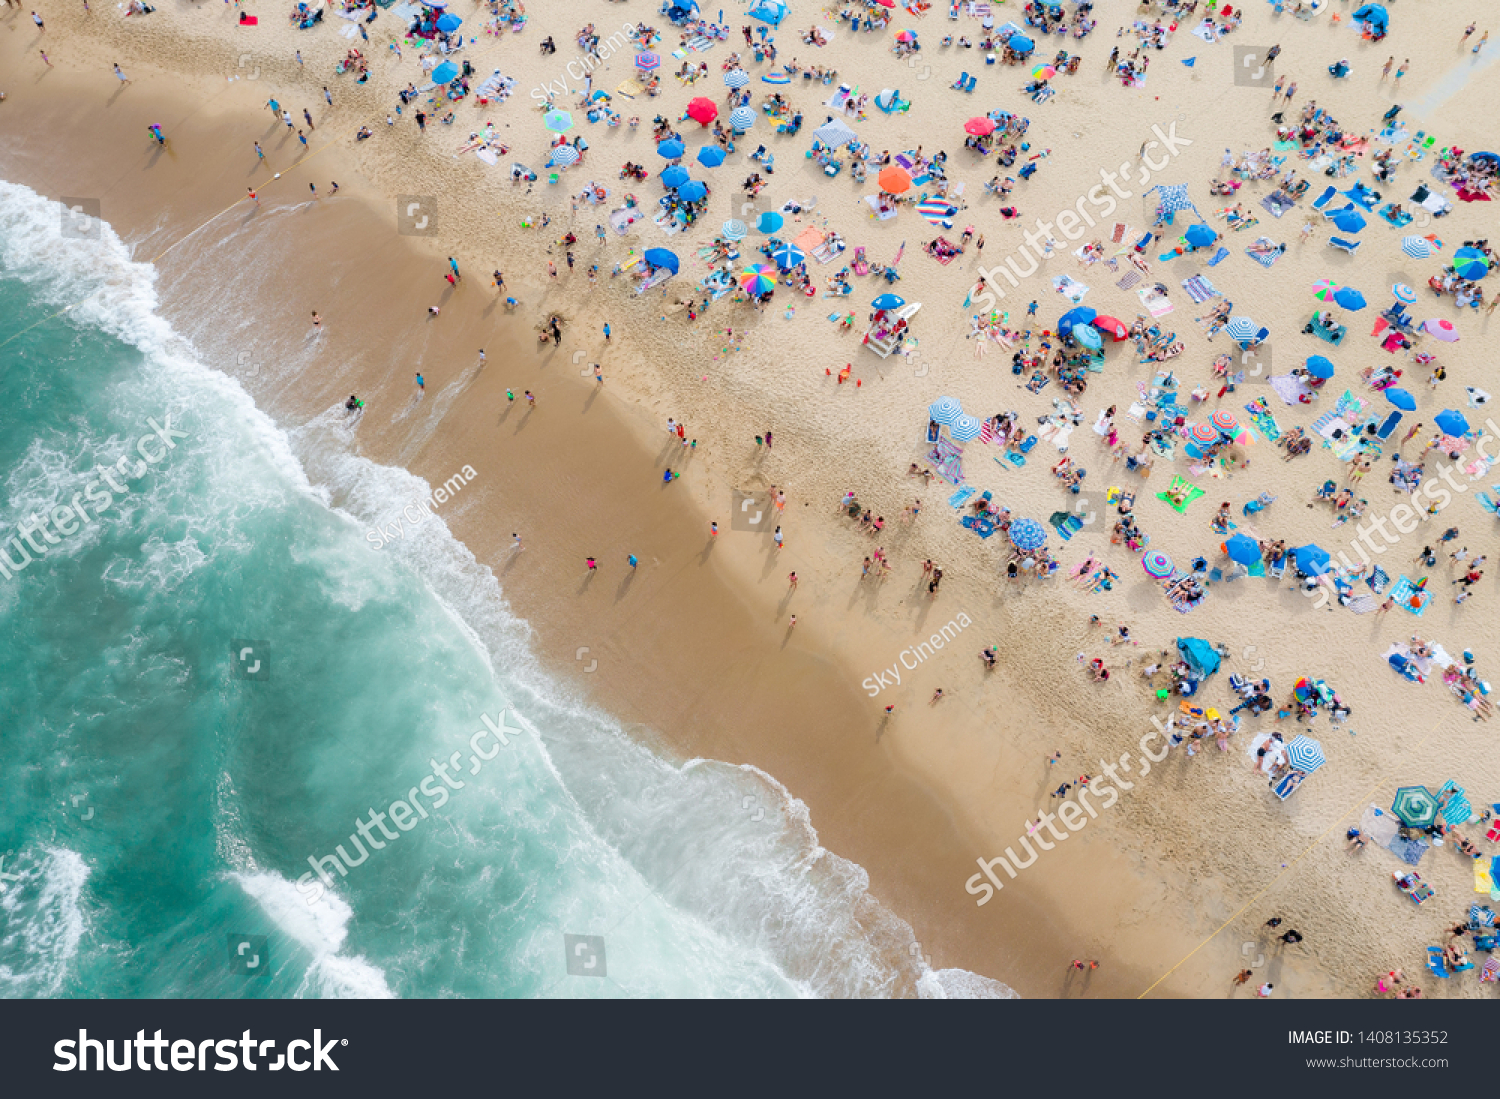 Aerial view of beach goers in Asbury Park, New Jersey on Memorial Day Weekend 2019 #1408135352